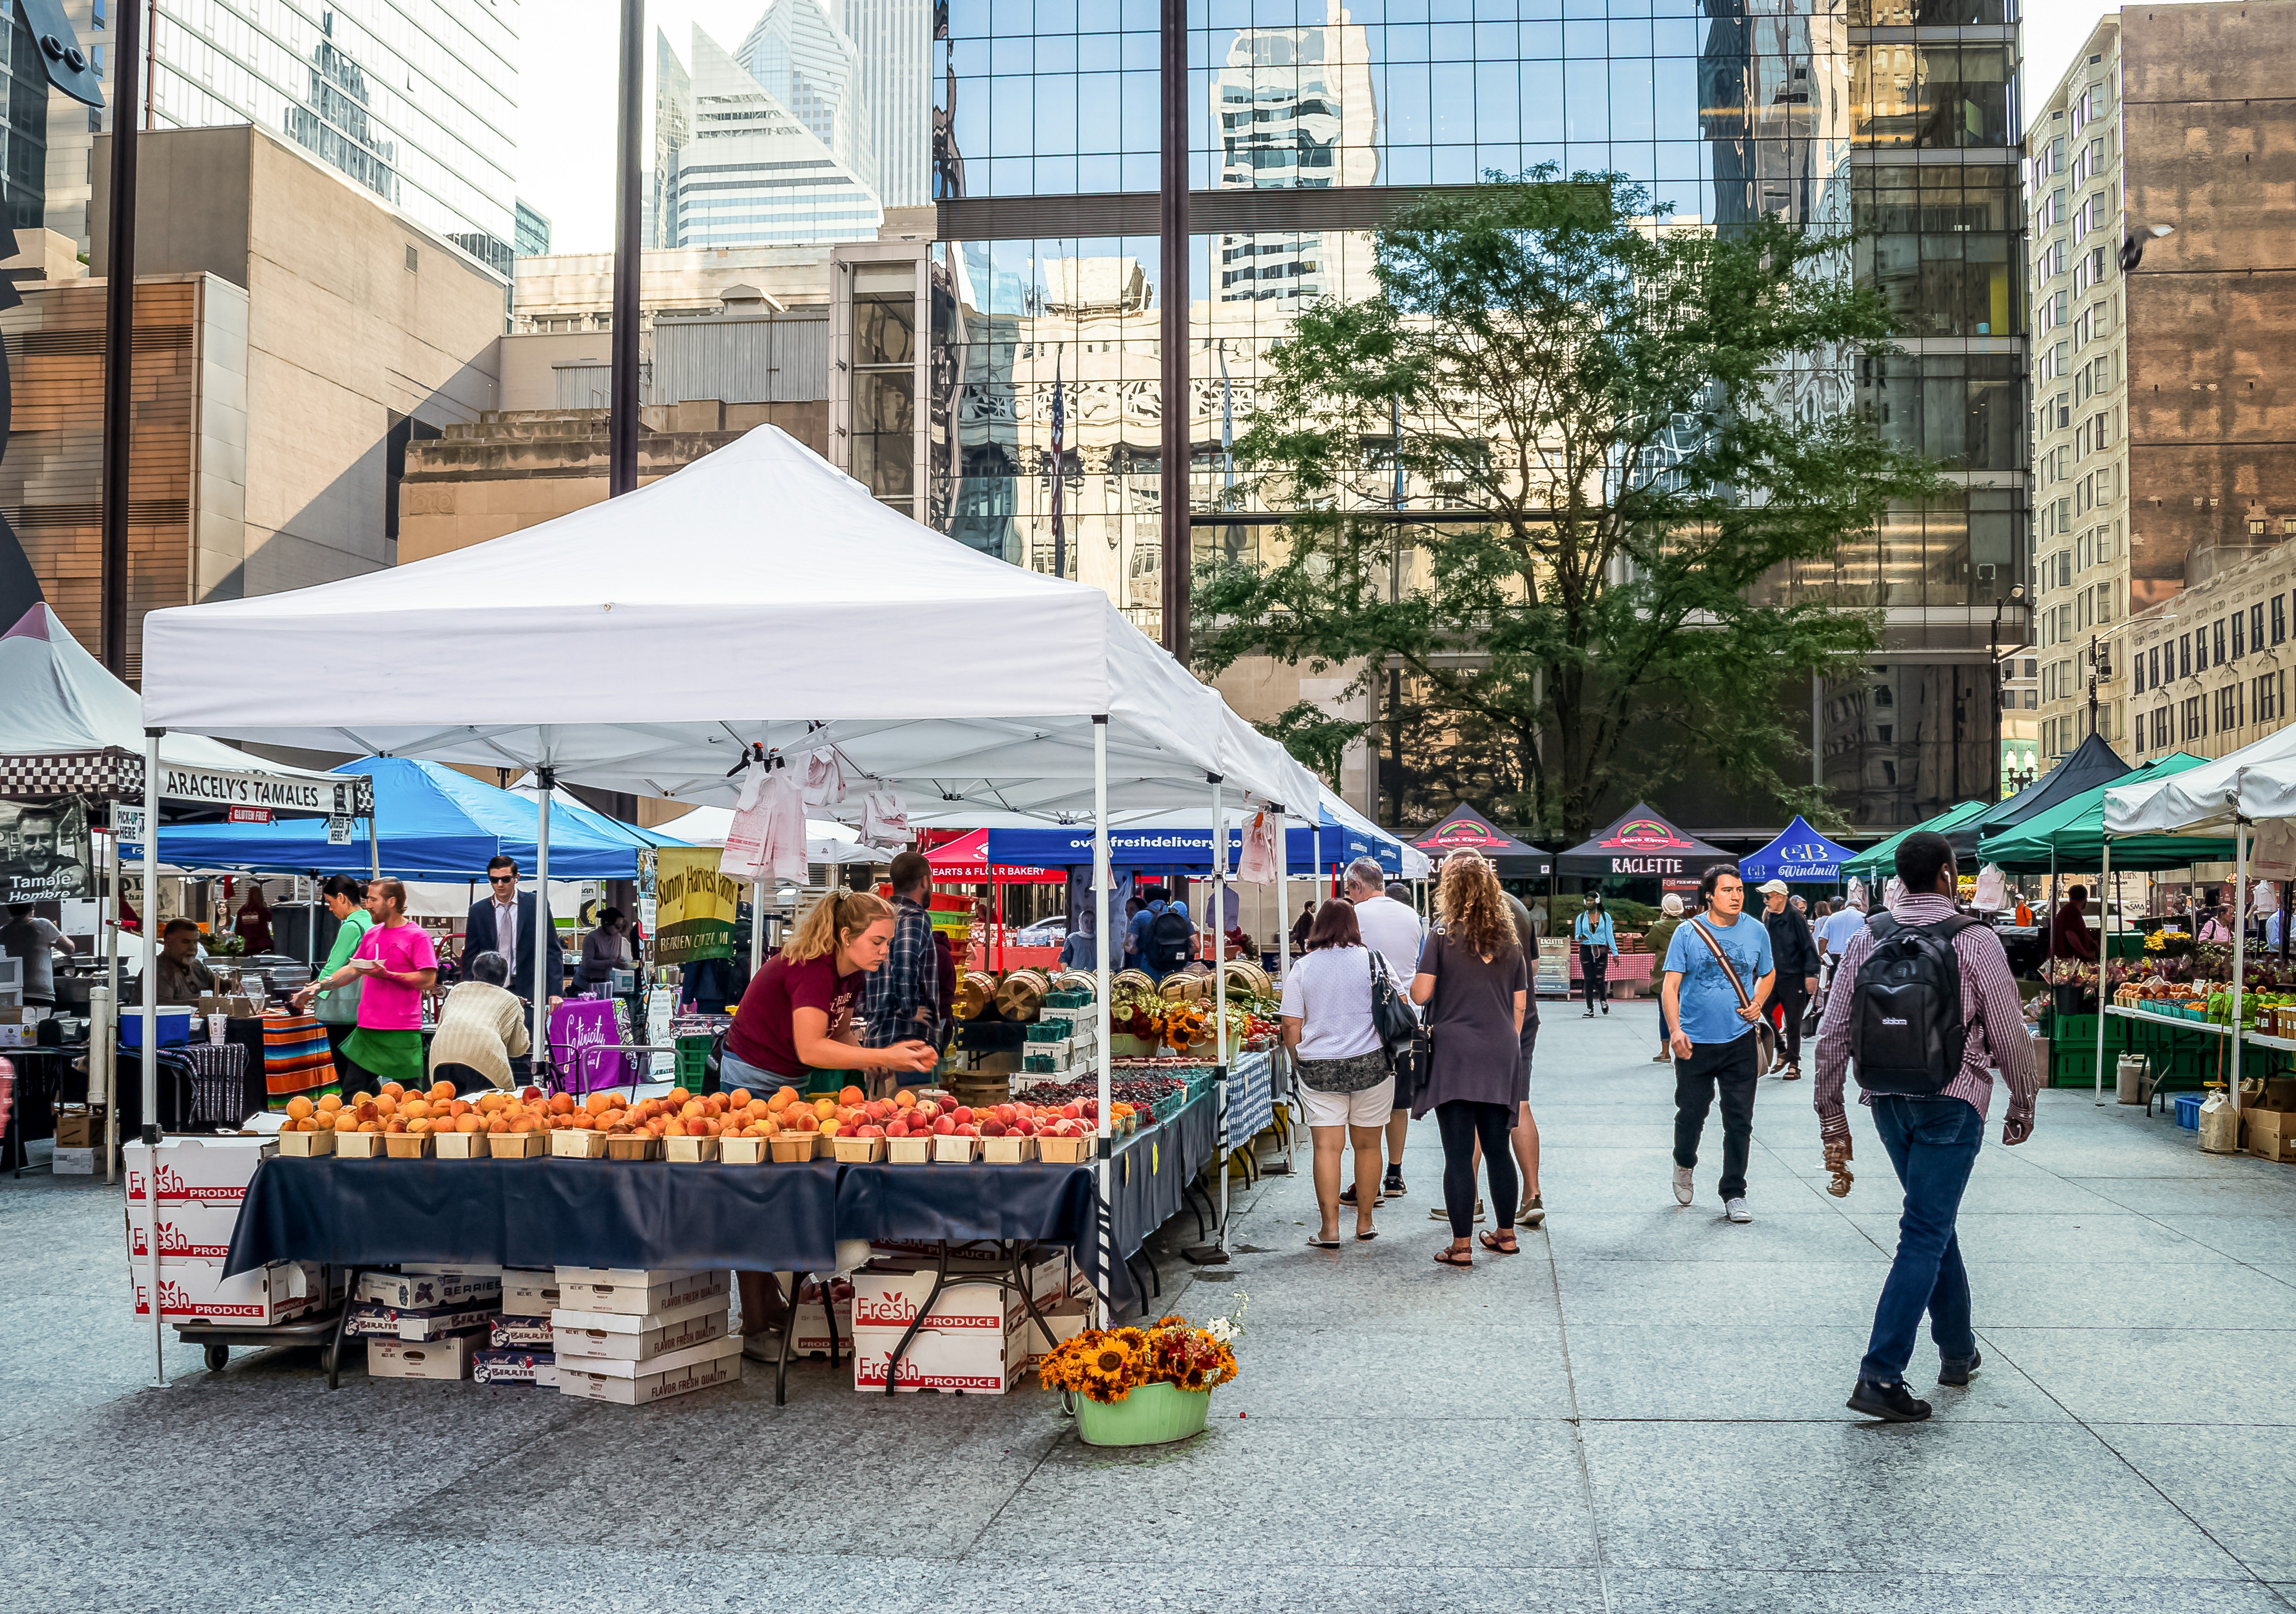 Crowds of people browse the Chicago farmers market located at Daley Plaza during summer morning.